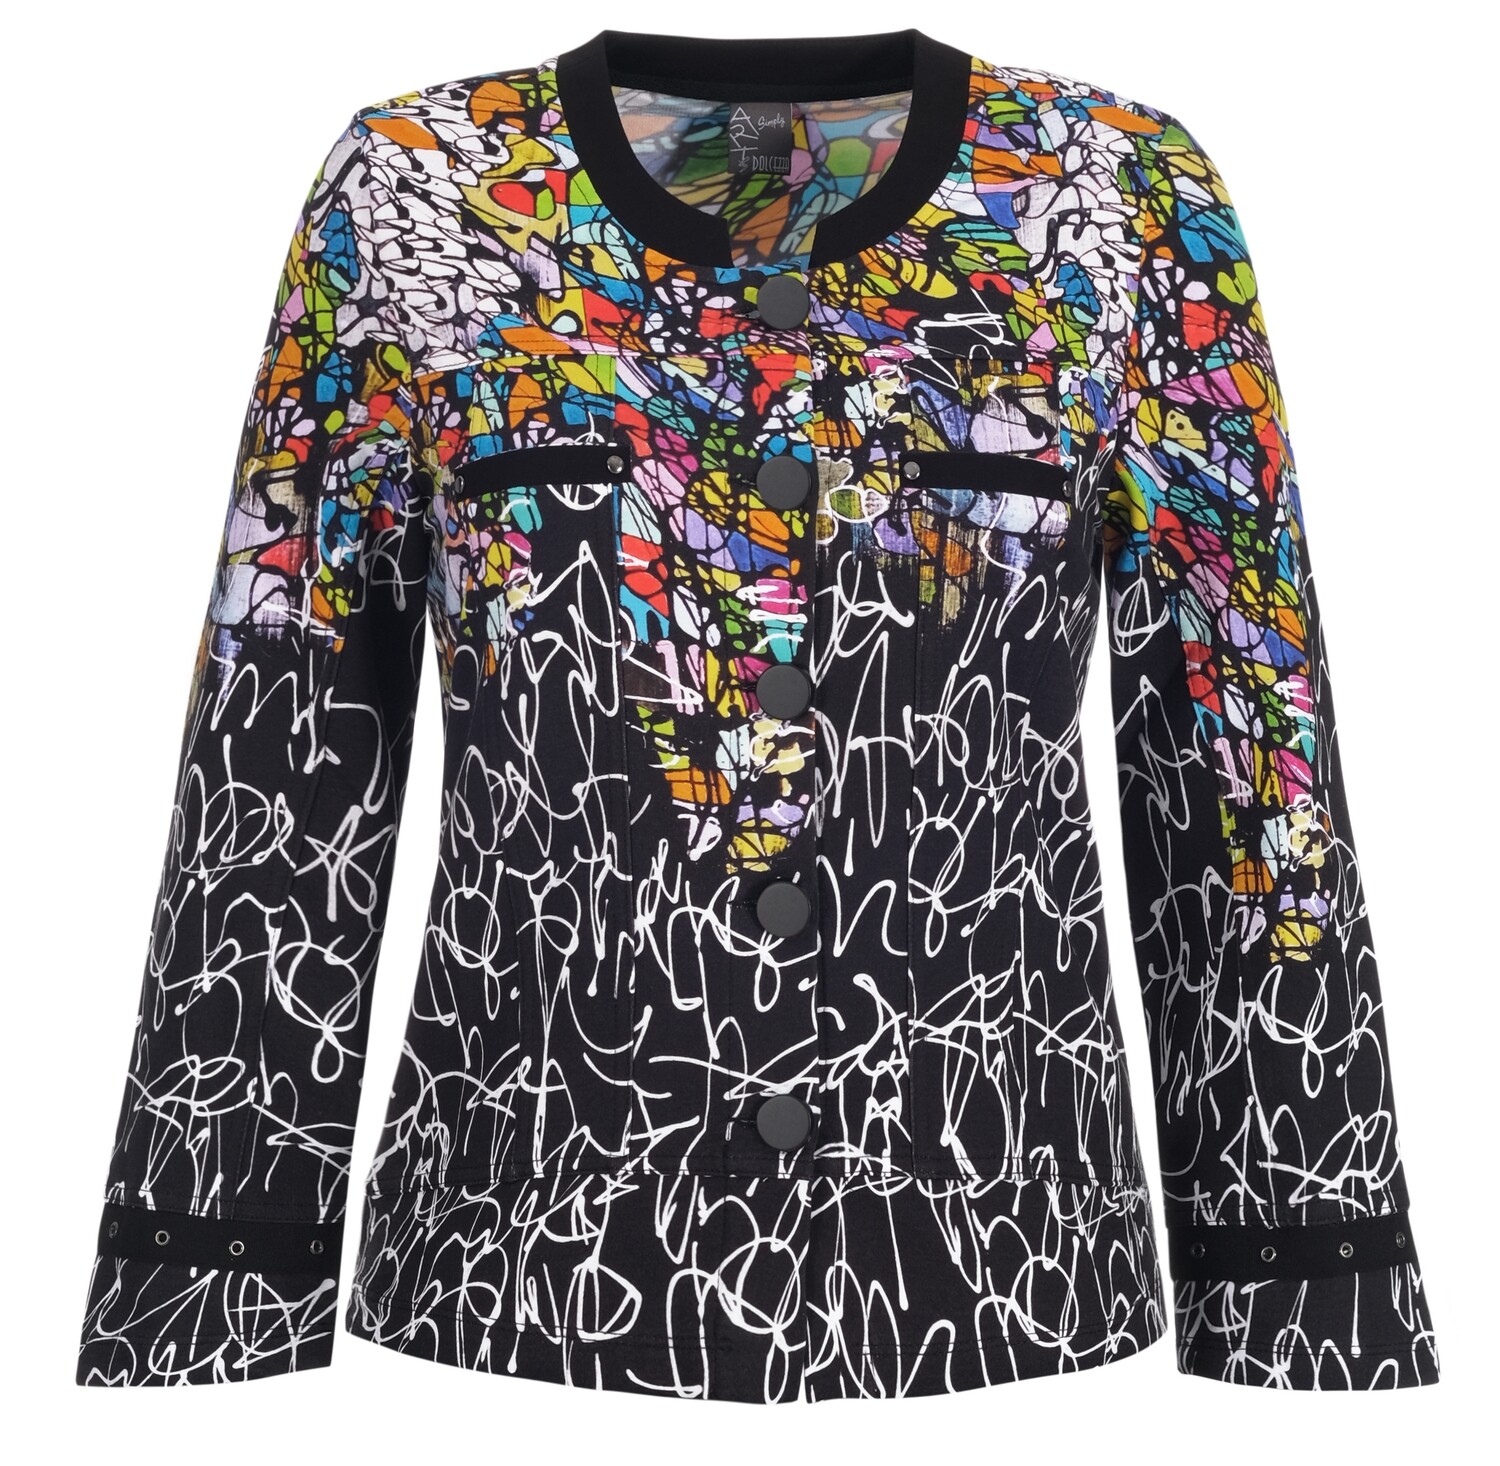 Simply Art Dolcezza: Black Board Abstract Art Cardigan